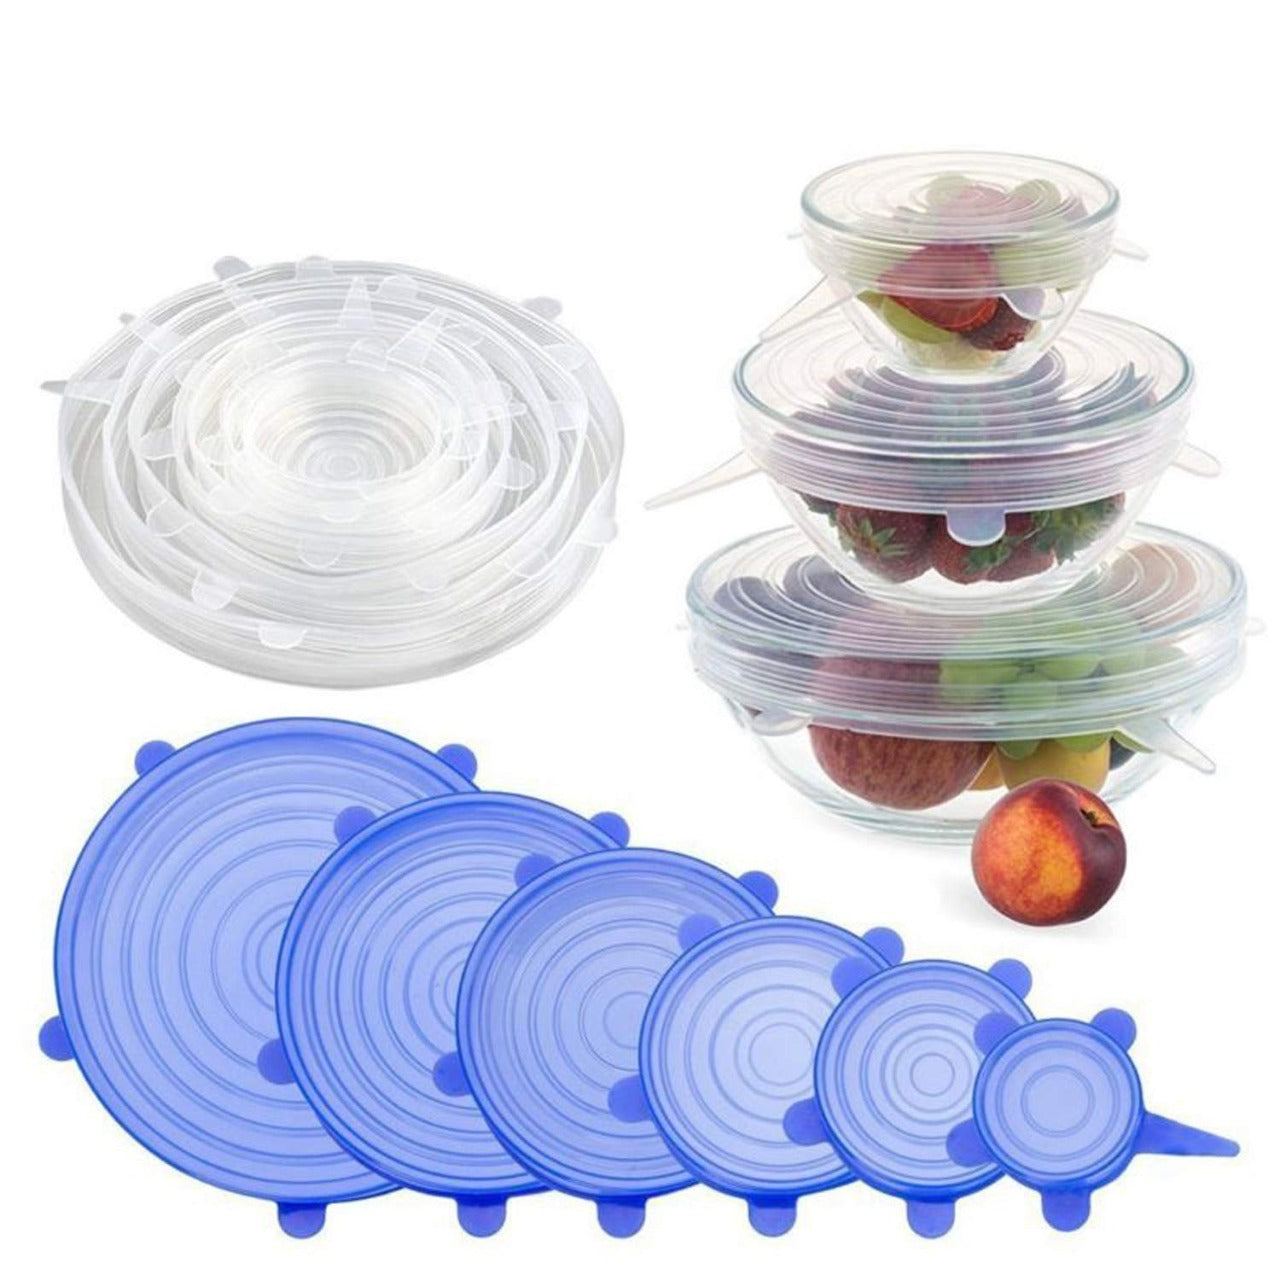 Silicone Lid Set, Silicon lids for containers, Silicon Stretchable lids, Silicone lids and Cover